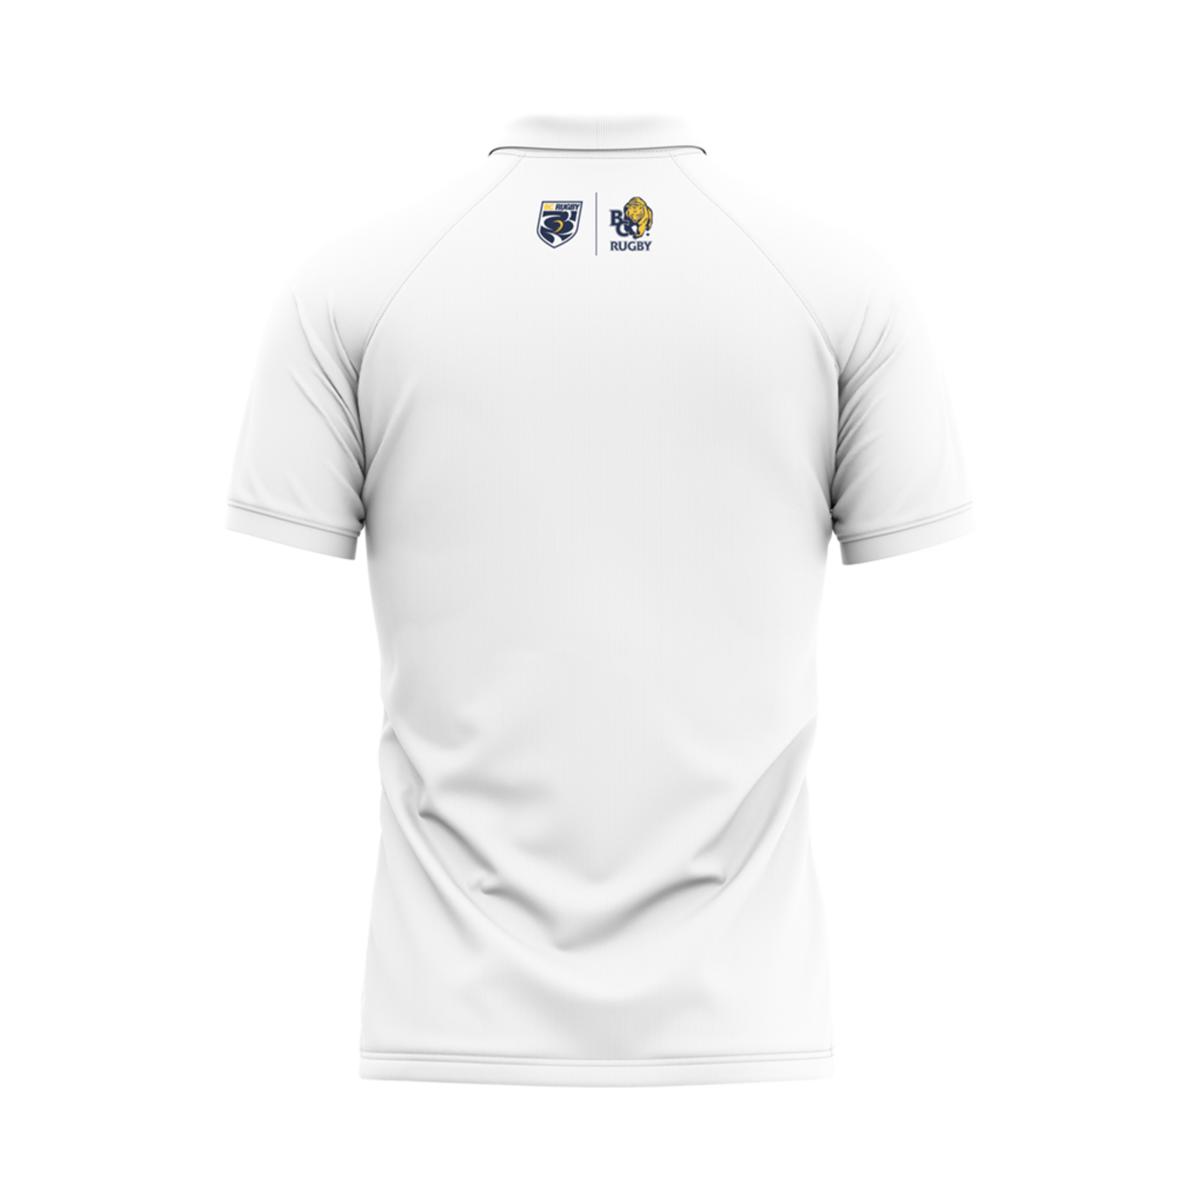 BC Rugby 2022 Polo - www.therugbyshop.com www.therugbyshop.com XIX Brands TEES BC Rugby 2022 Polo